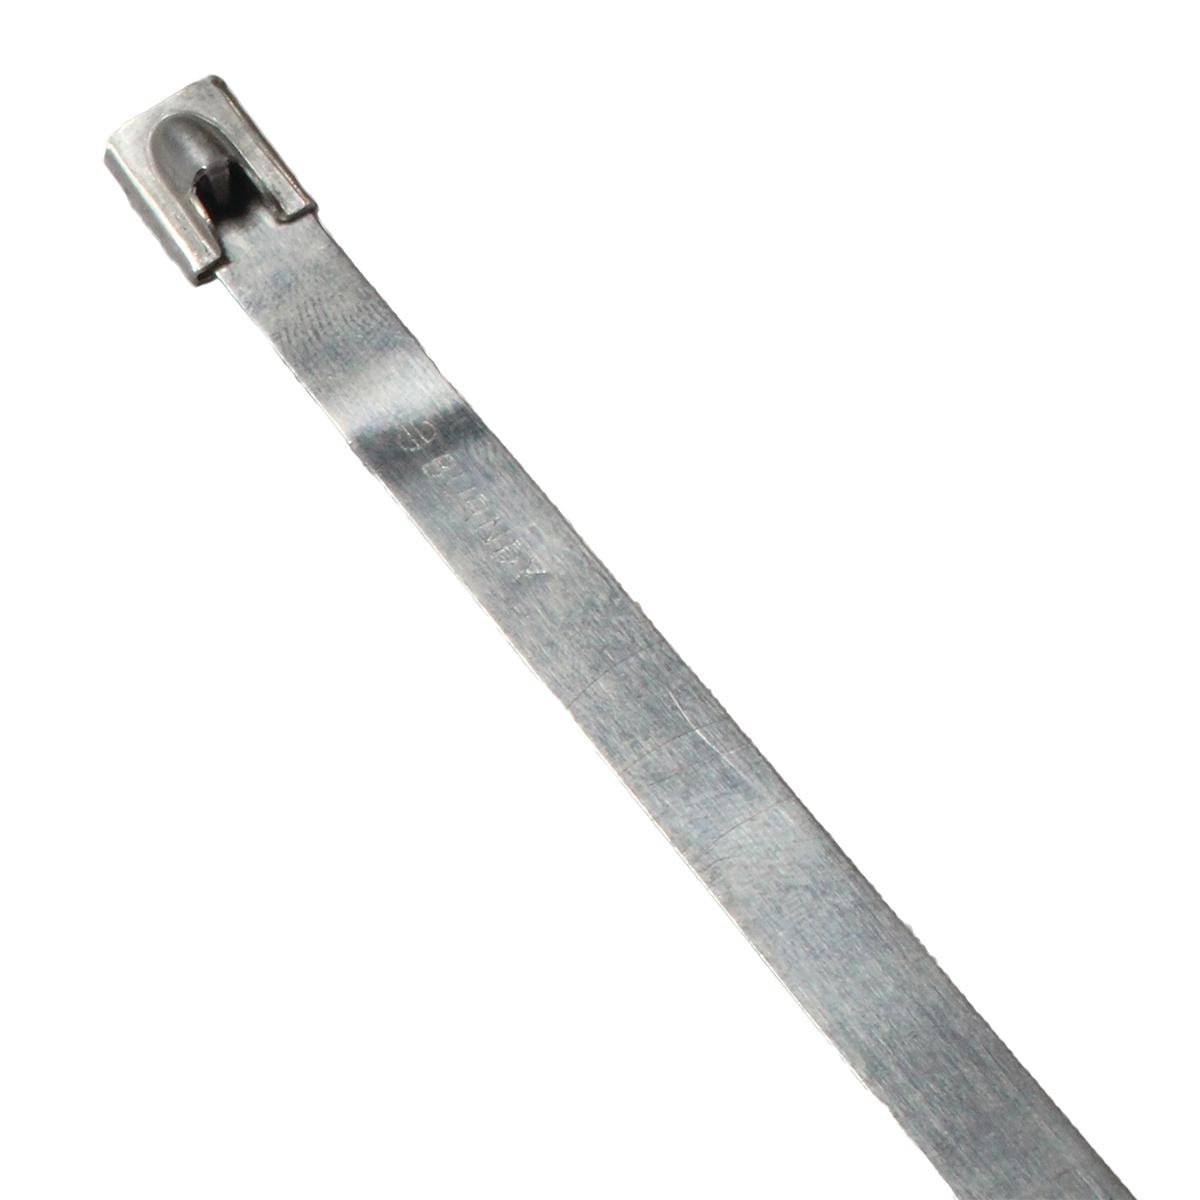 Hubbell CTSS500300304L Uncoated stainless steel cable ties 304 grade, Tensile strength: 500 Lb, 11.81" L, 0.31" W, 3.00" Bundle Dia.  ; Smooth, rounded edges help ensure safe, efficient handling ; Ergonomically designed installation tools consistently tensions and cuts off ties